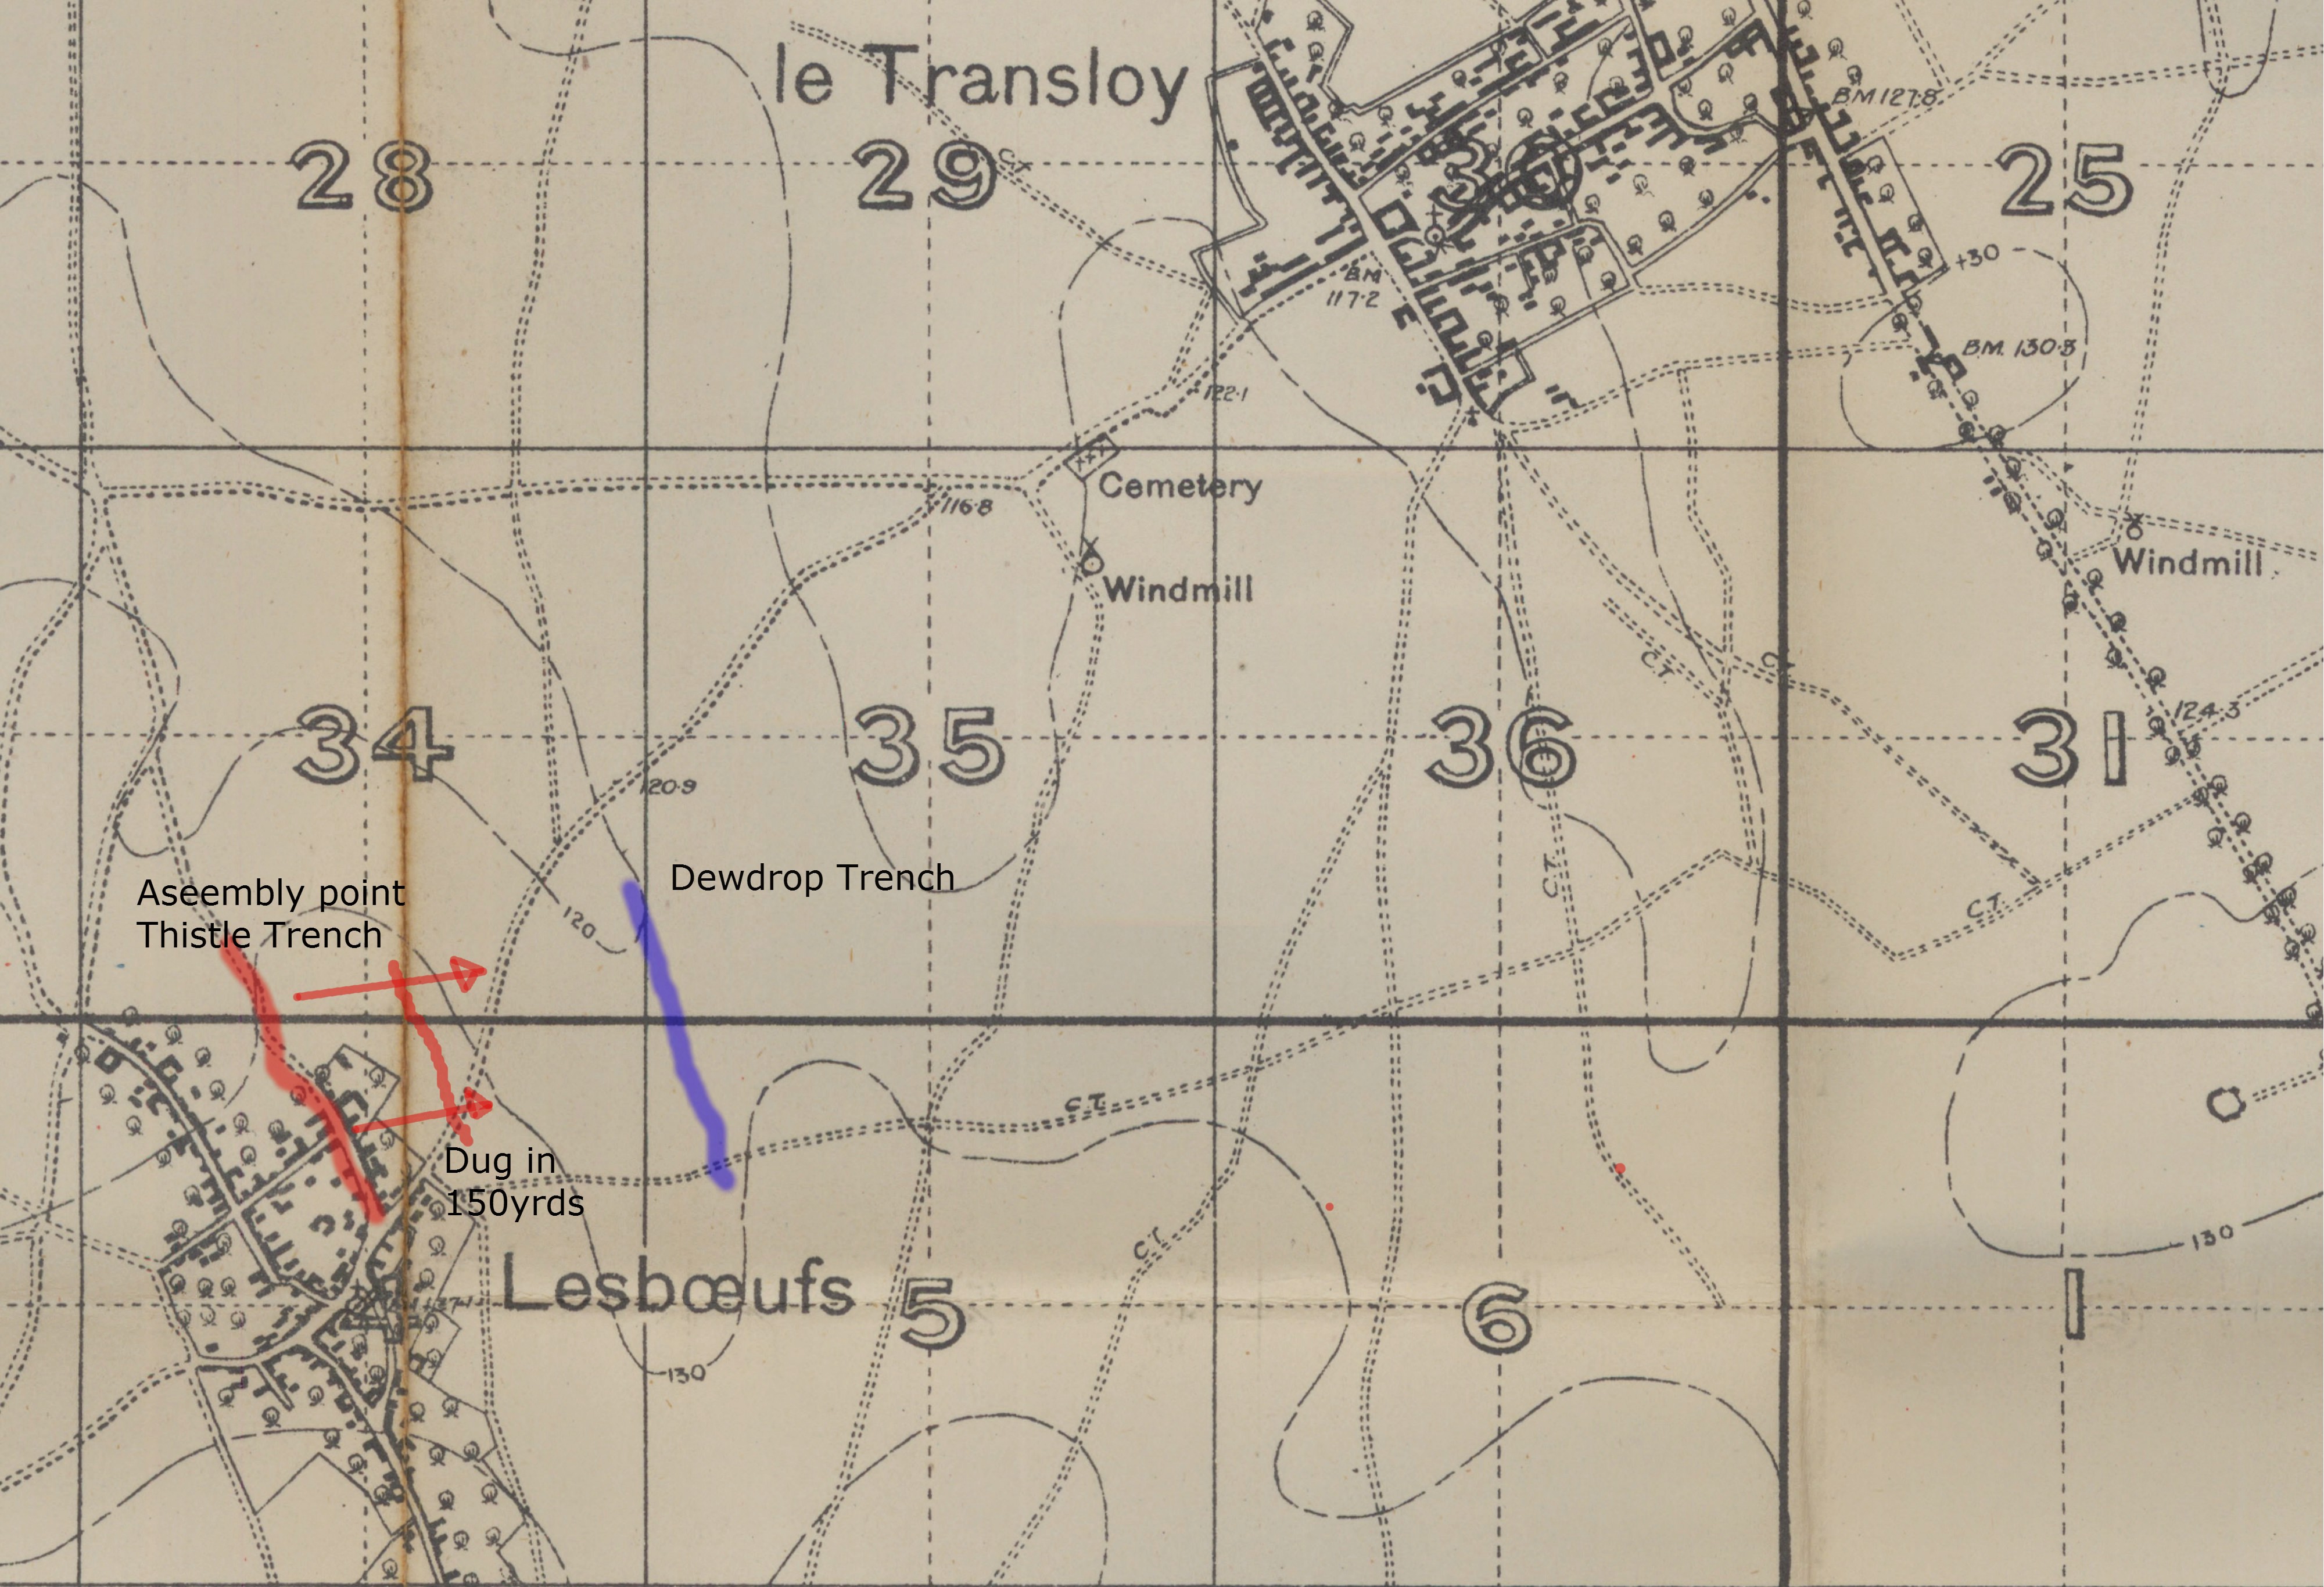 Trench mapDewdrop Trench 23rd Oct; Combles France